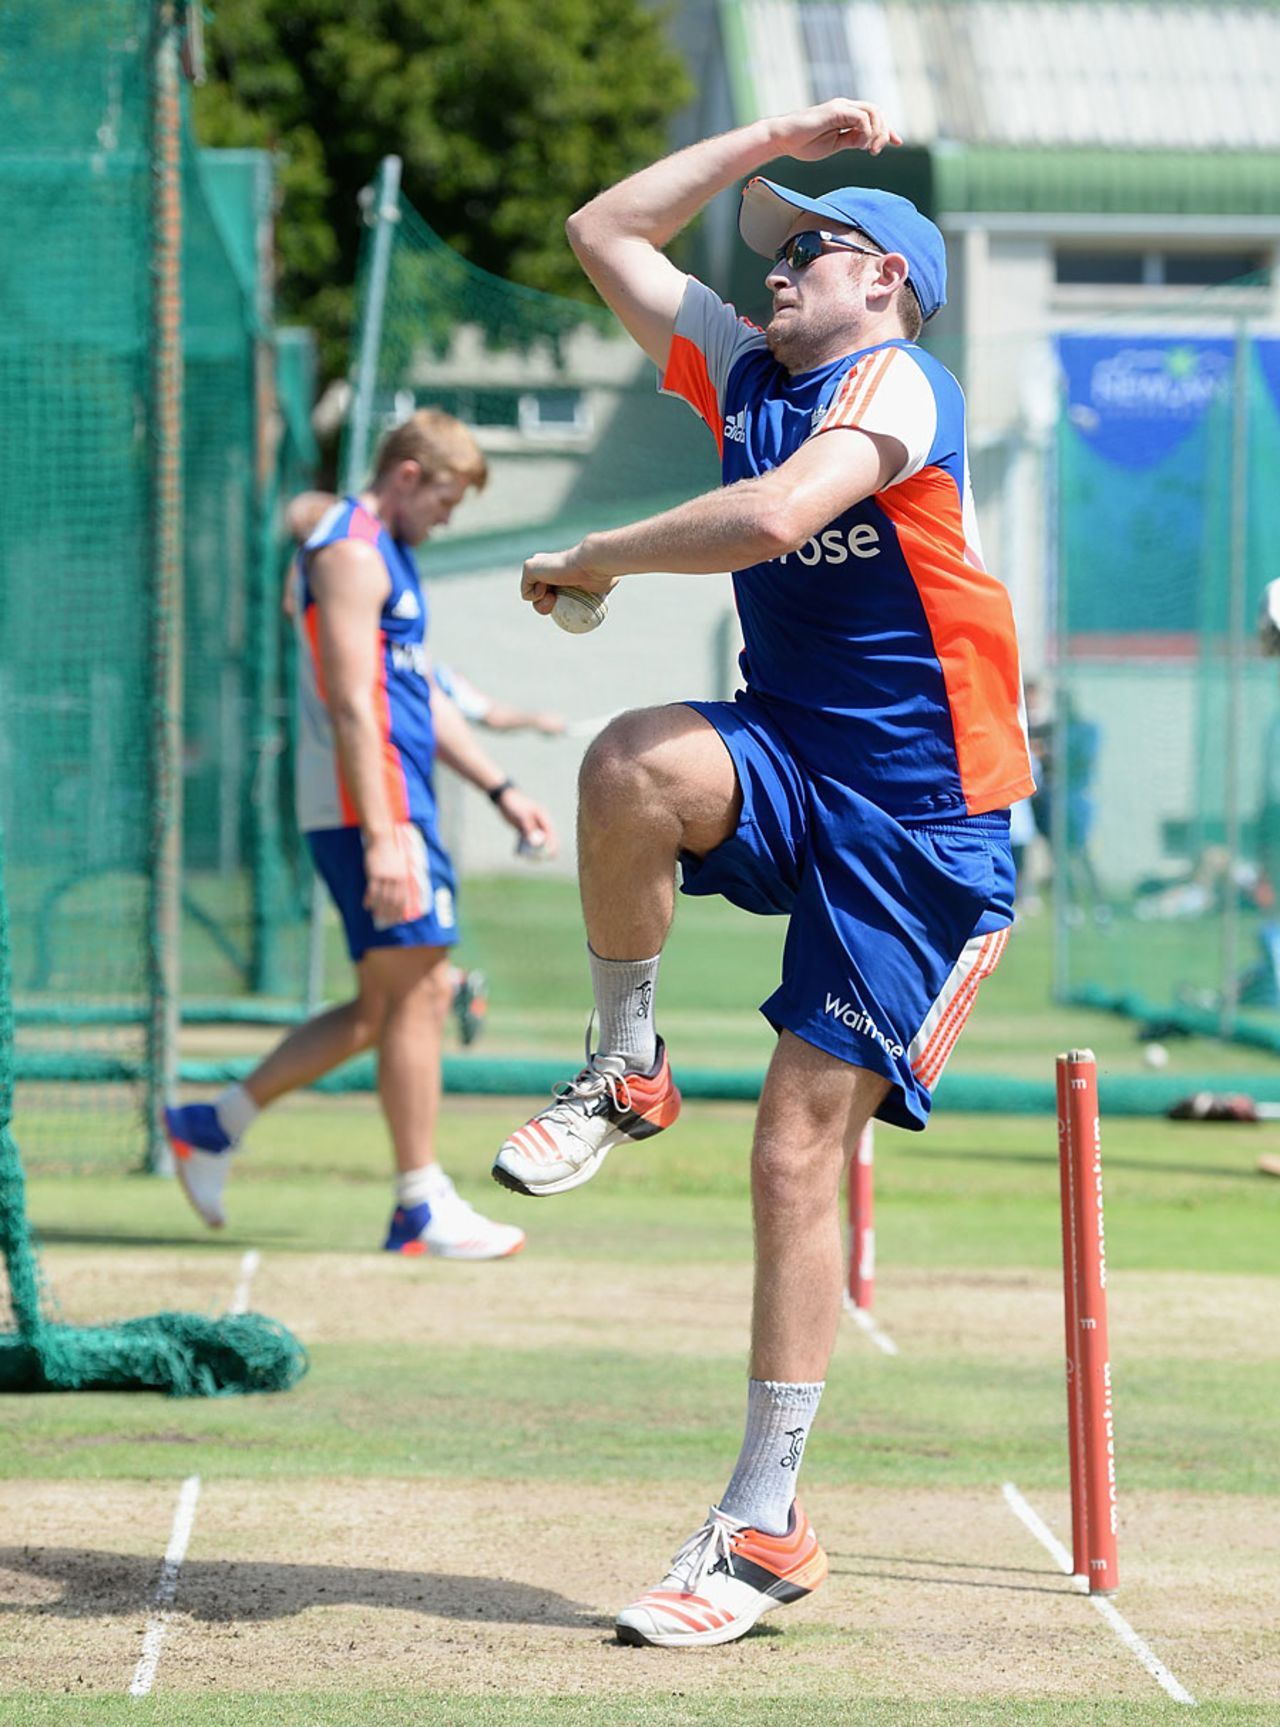 Liam Dawson bowls in the nets, Cape Town, February 16, 2016